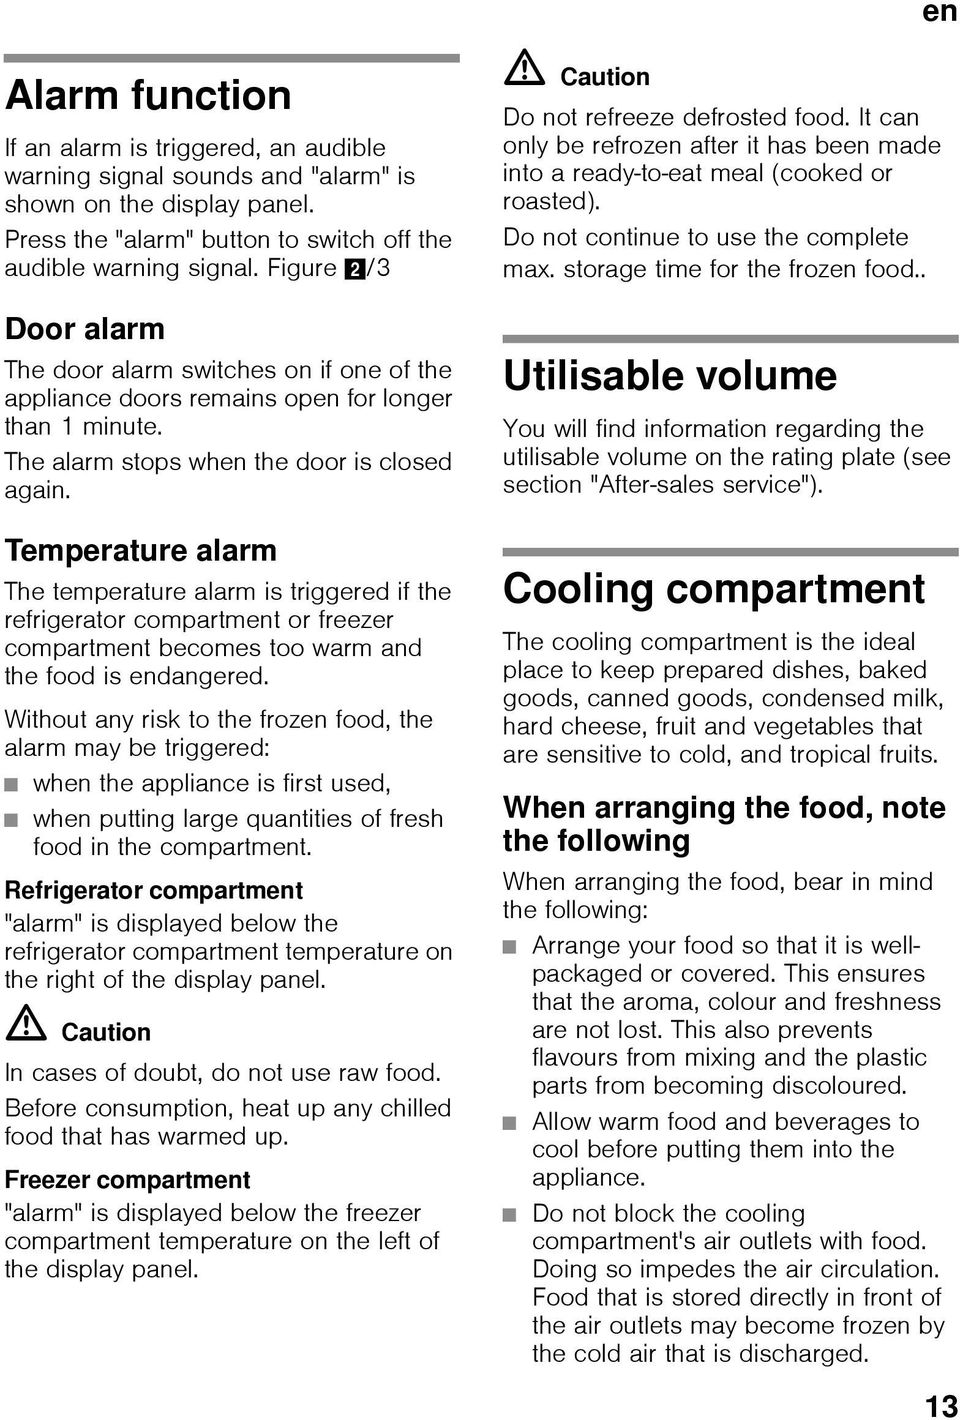 Temperature alarm The temperature alarm is triggered if the refrigerator compartment or freezer compartment becomes too warm and the food is endangered.